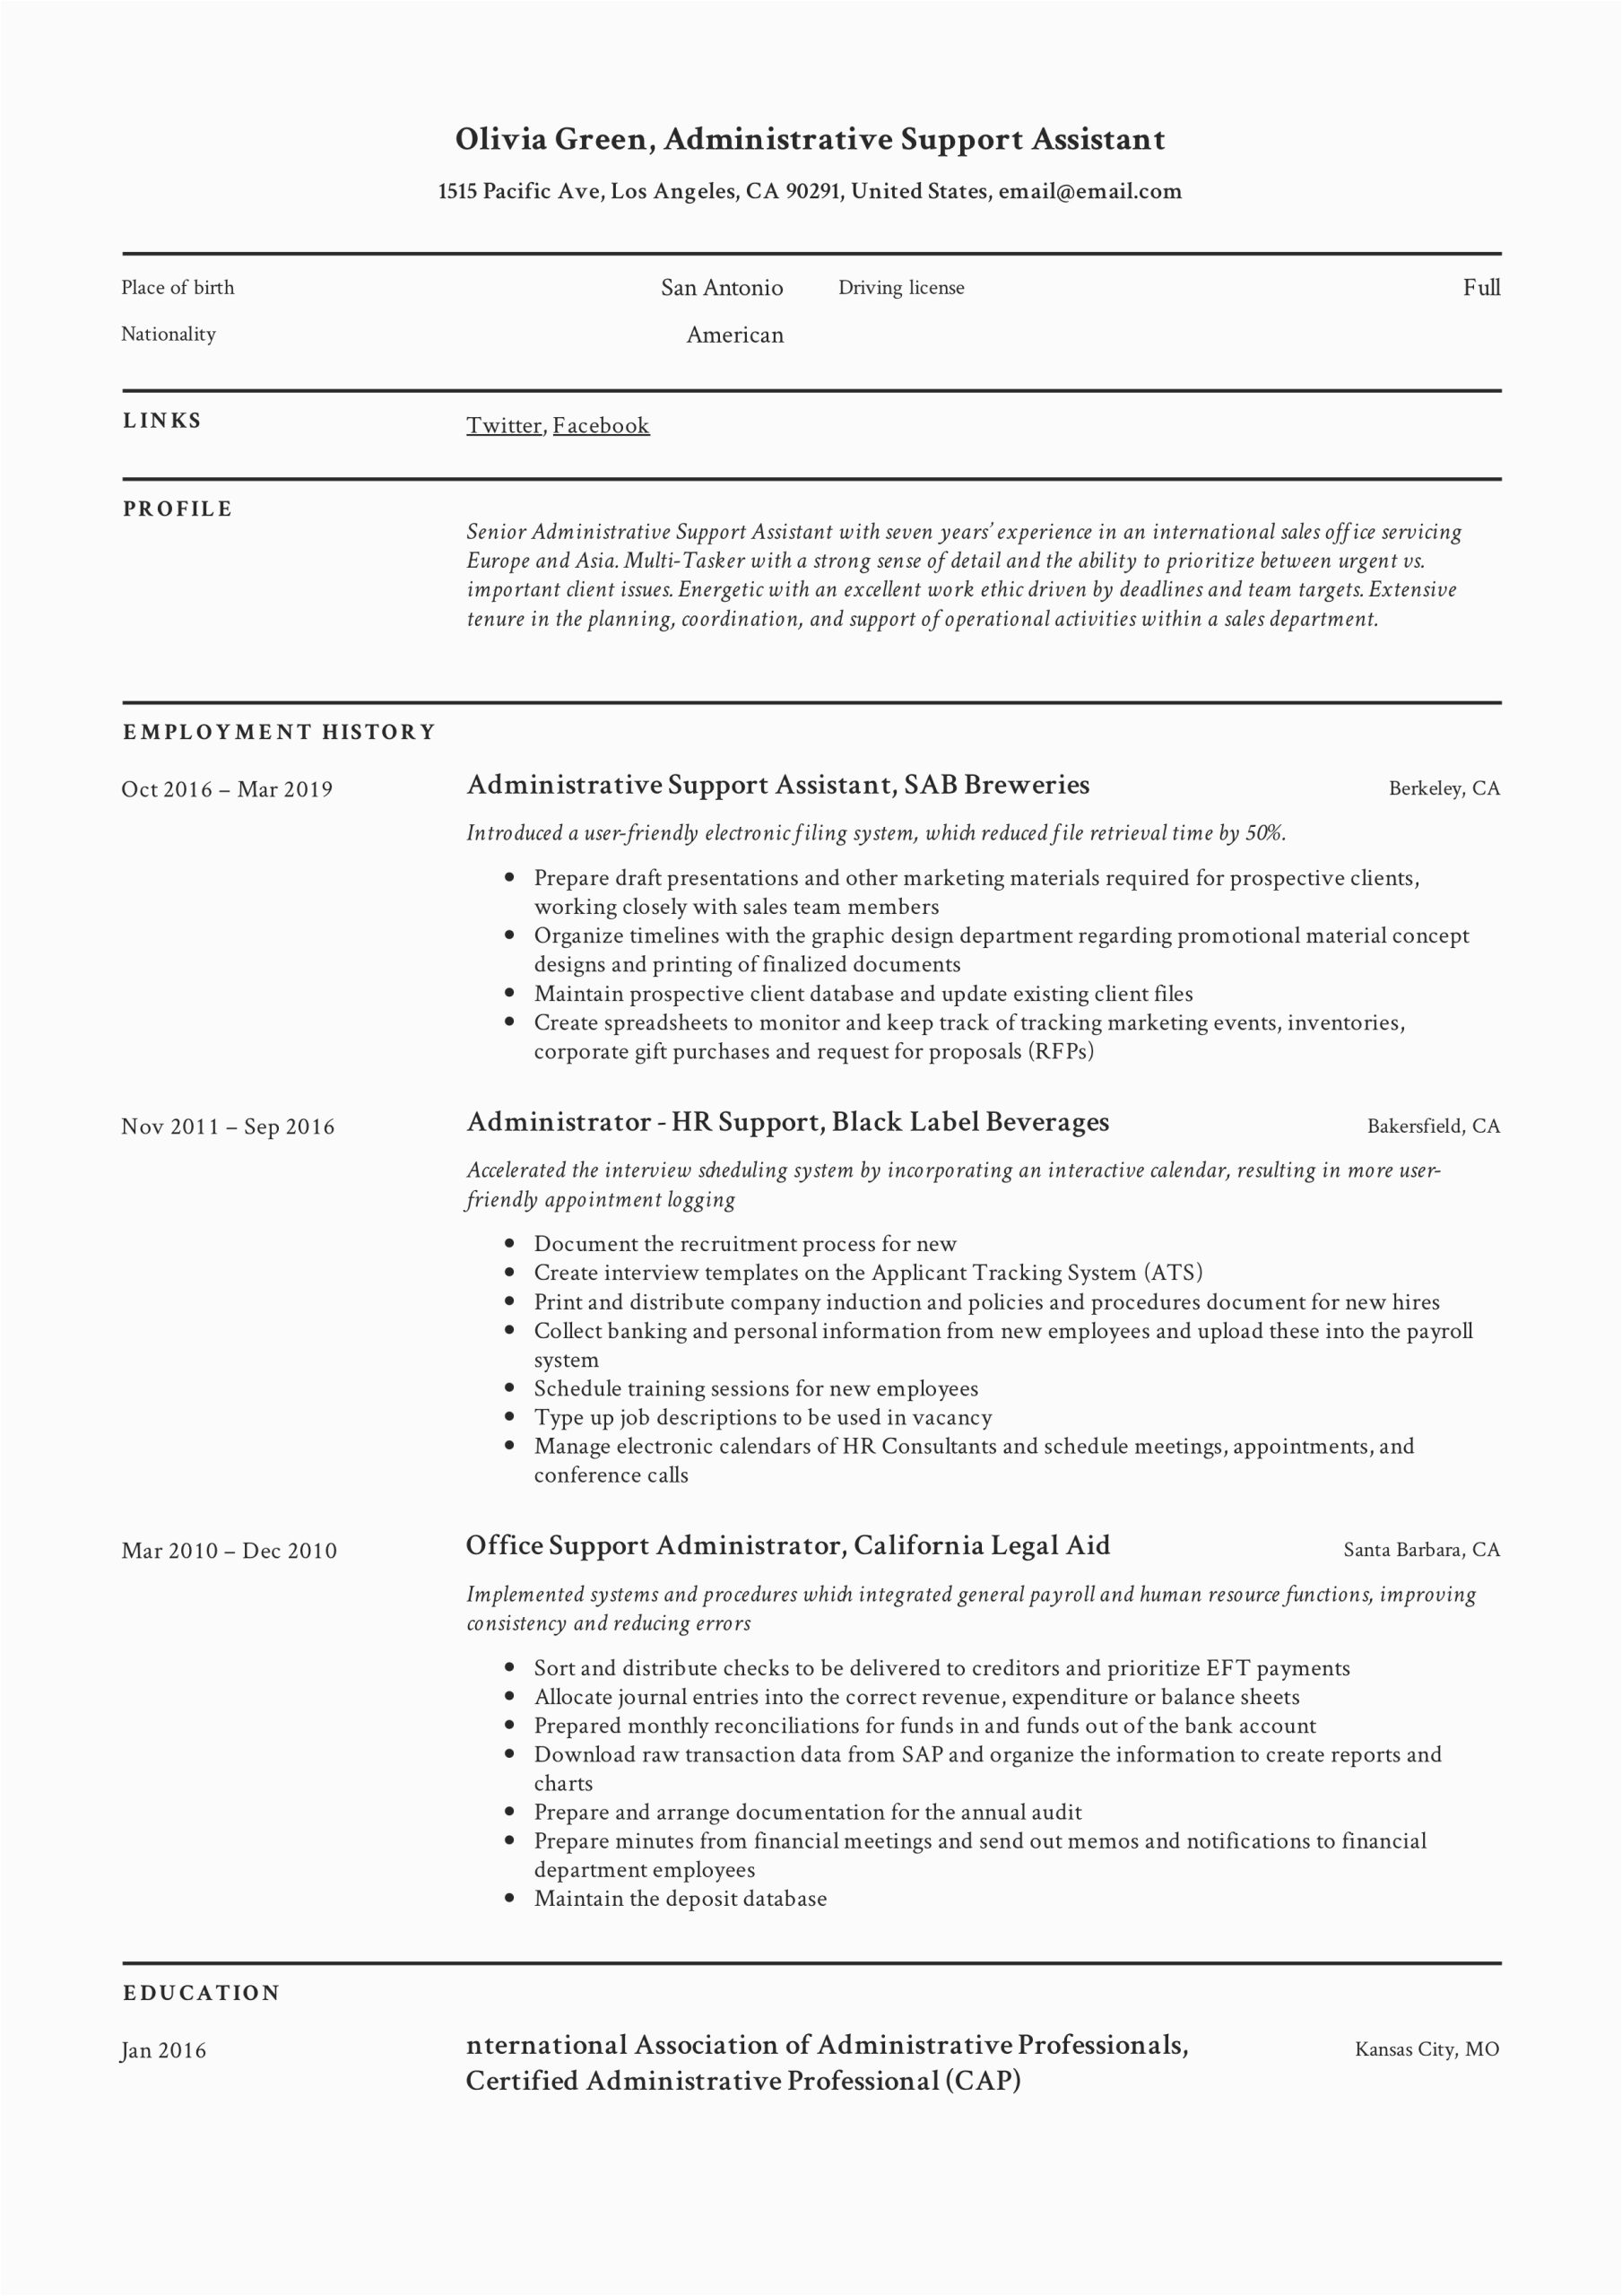 Resume Profile Samples for Admin assistant Administrative Support assistant Resume Guide